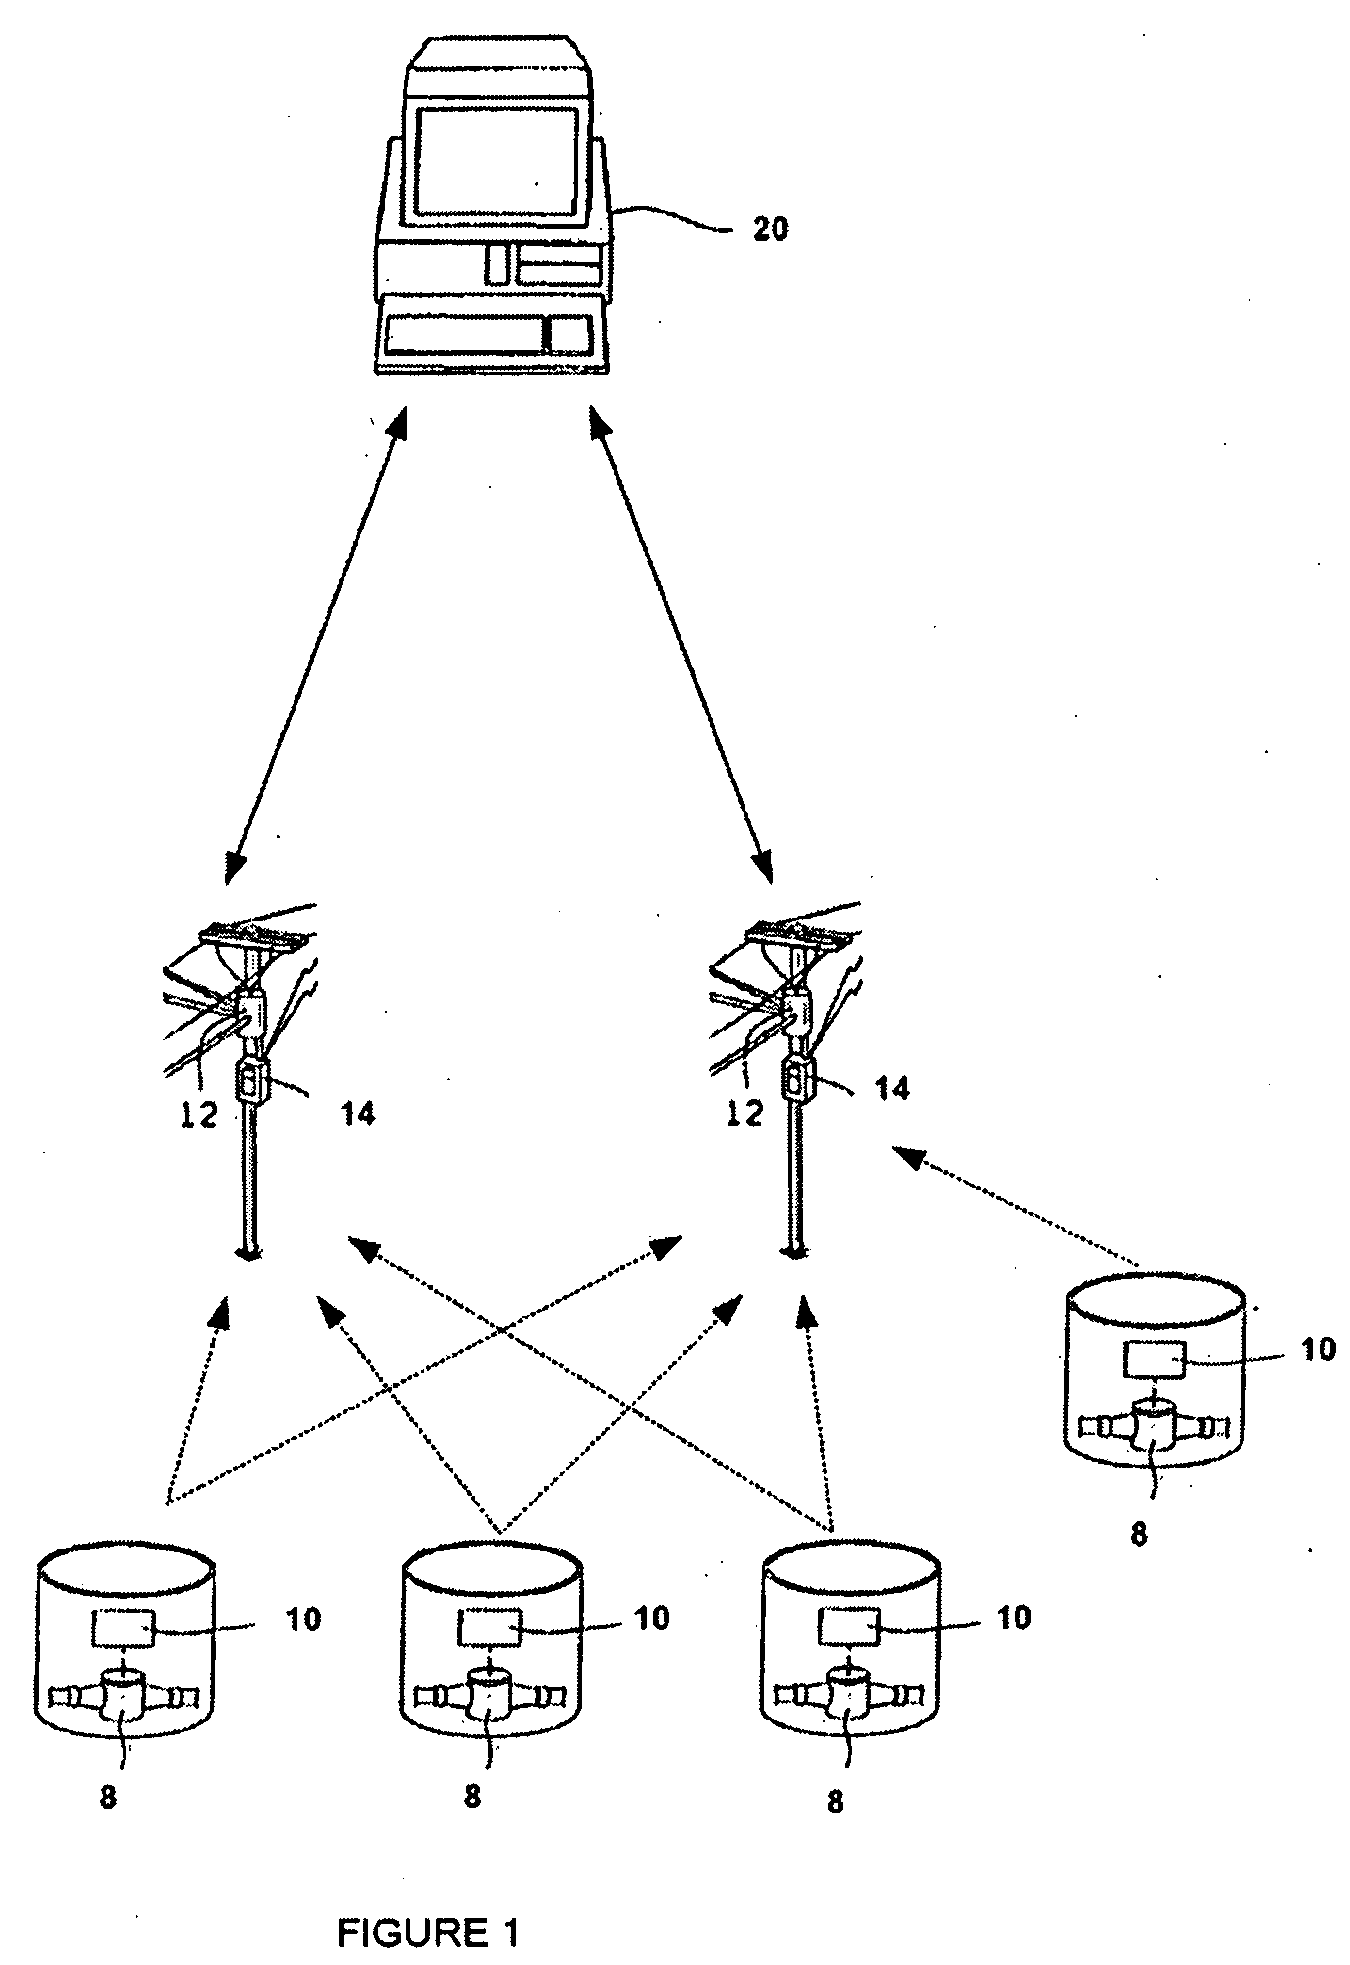 Fixed network for an automatic utility meter reading system